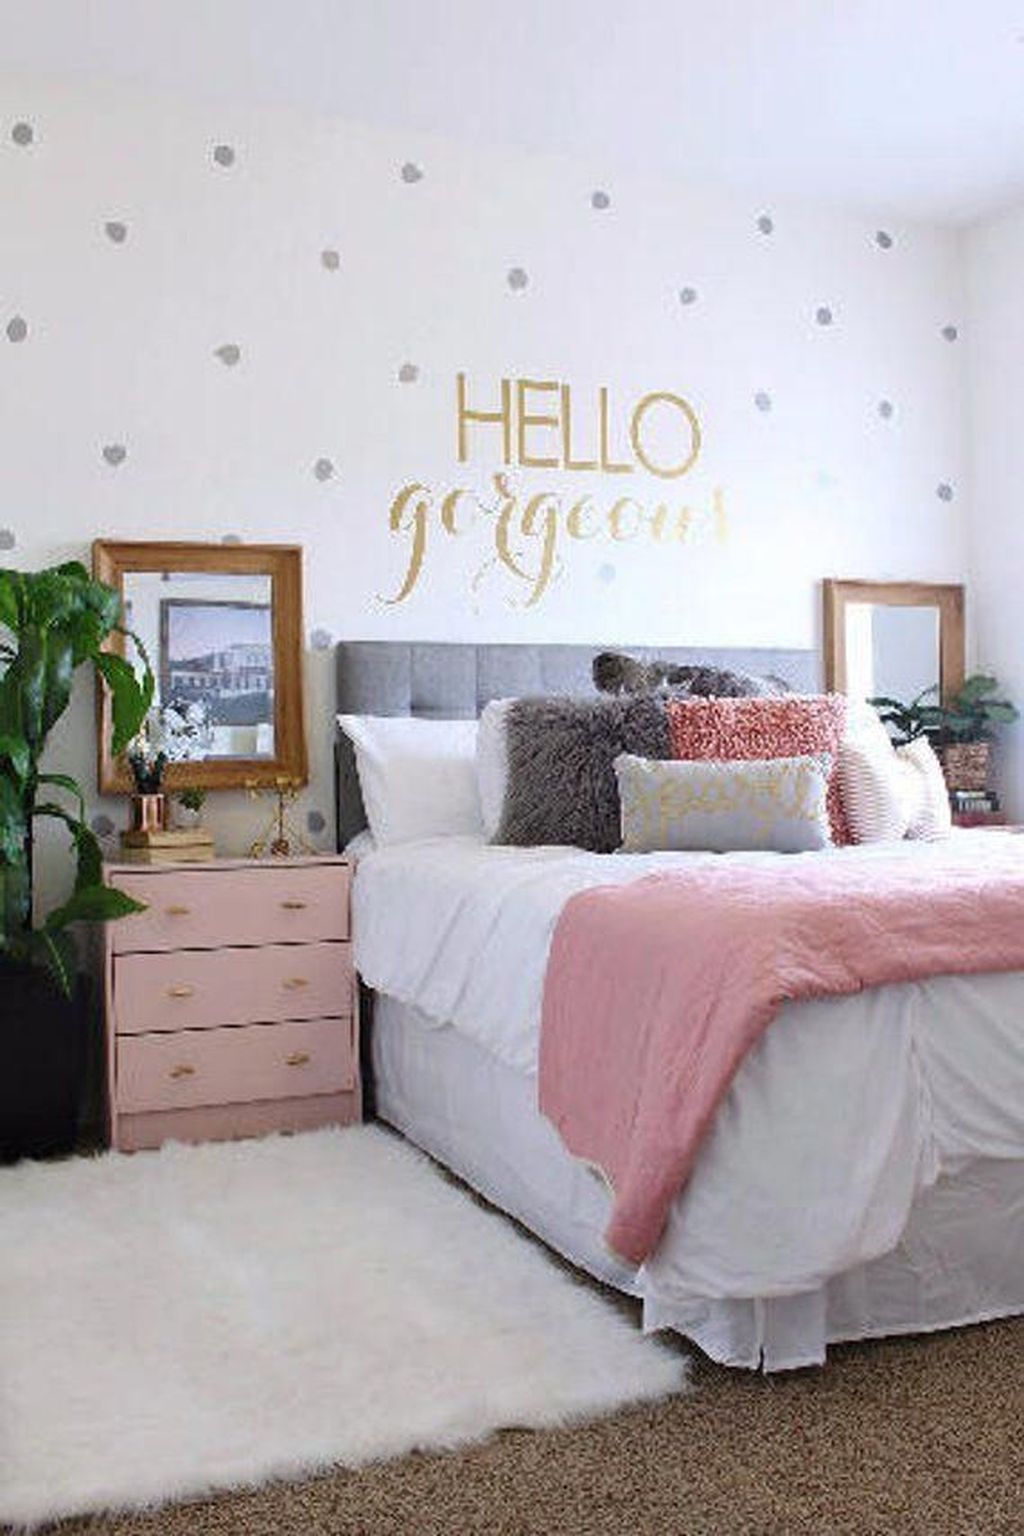 32 The Best Diy Bedroom Decor Ideas You Have To Try Pimphomee